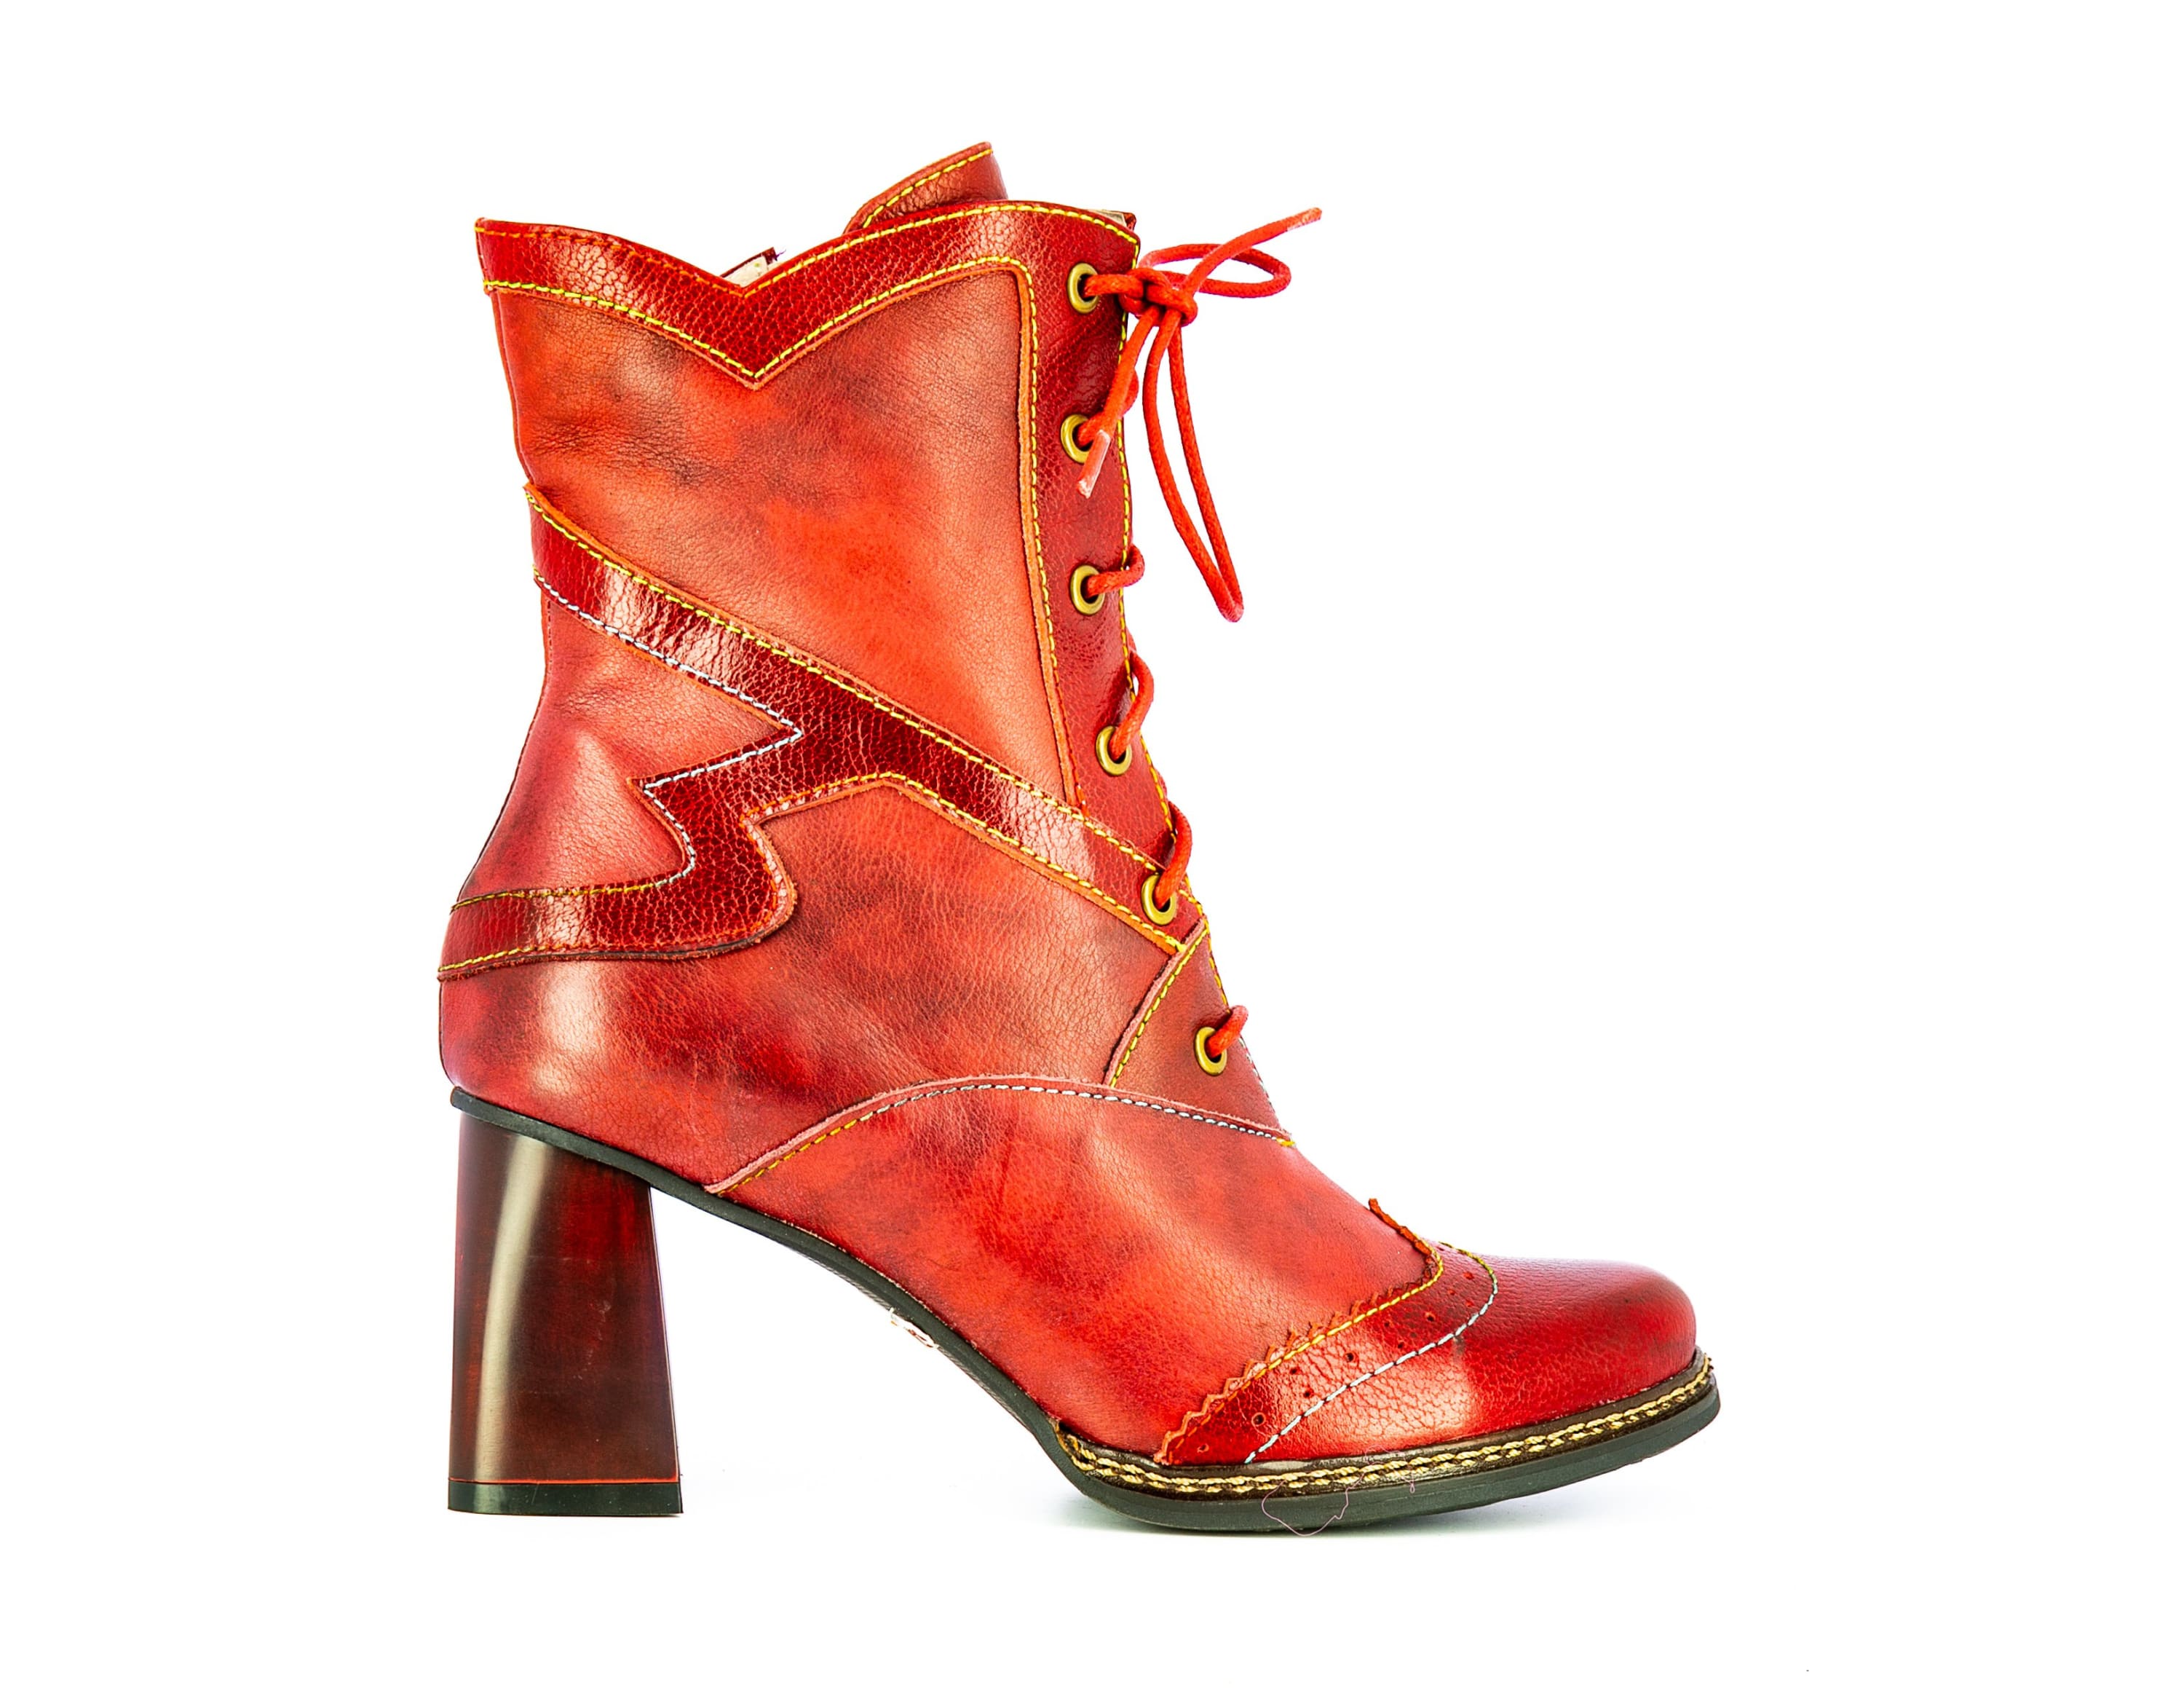 IDCANO 05 - 35 / Red - Boots